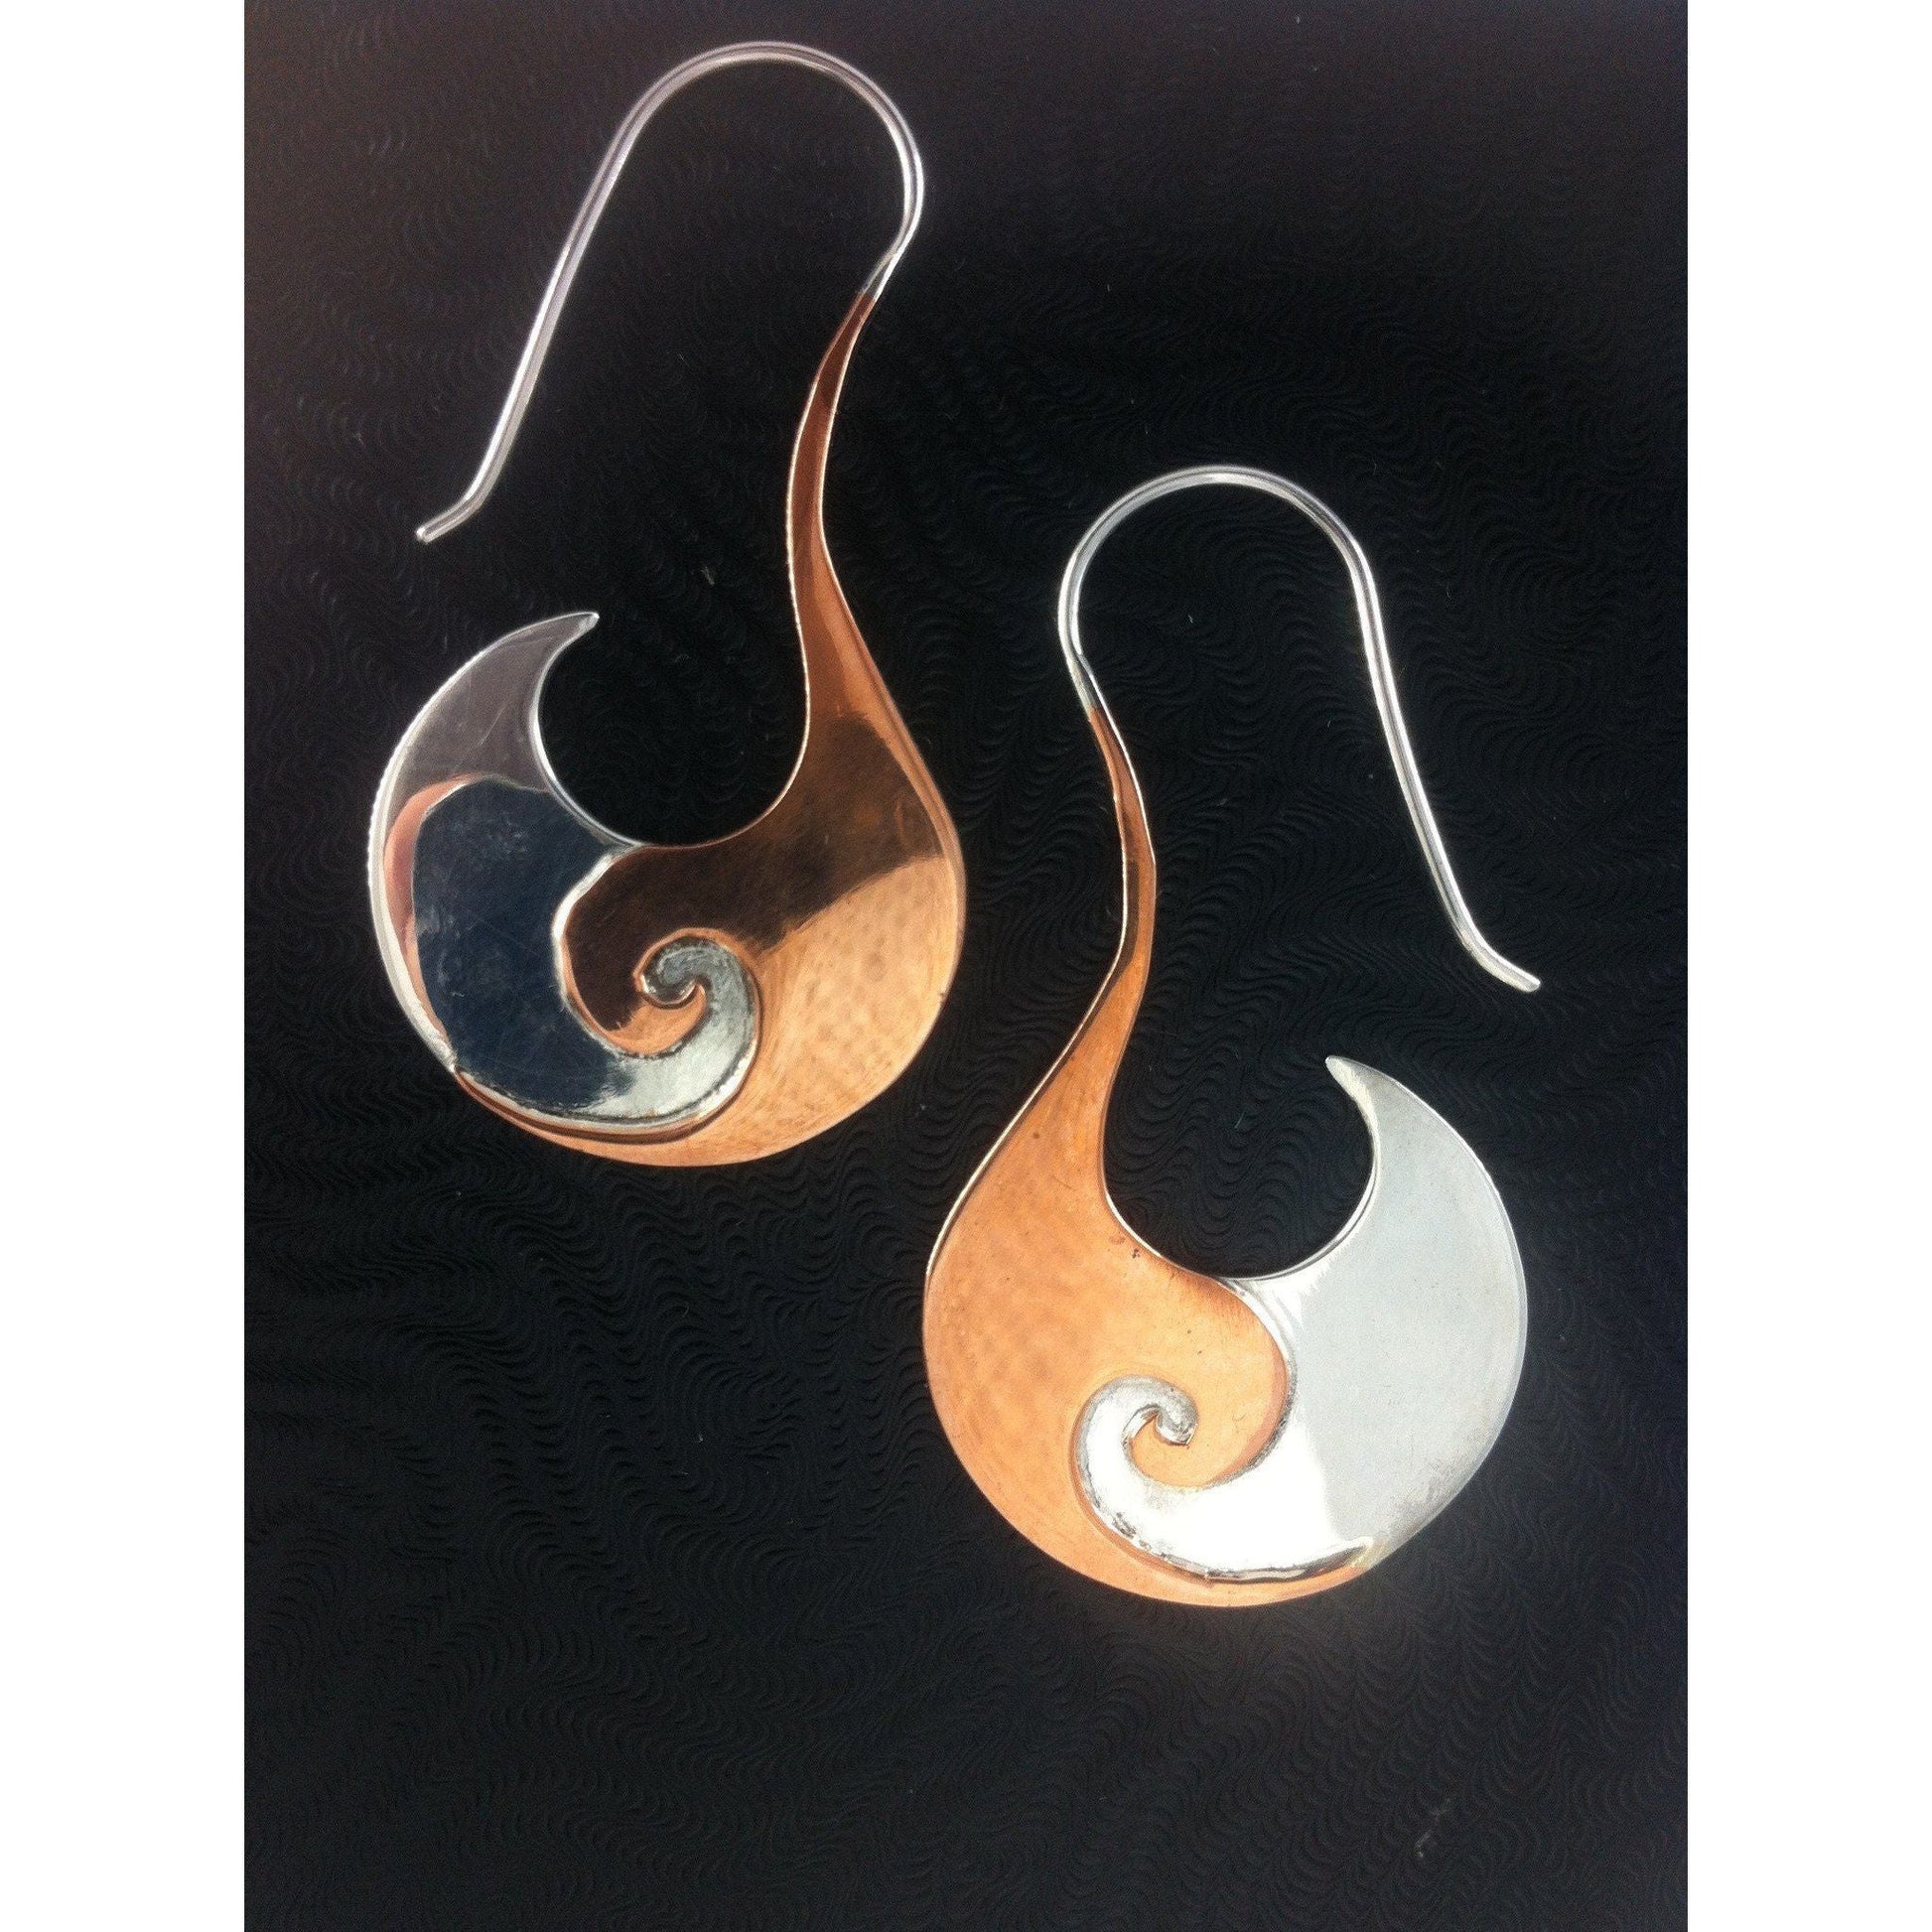 Tribal Jewelry :|: Sterling Silver Earrings, with copper highlights, $48 | Tribal Earrings